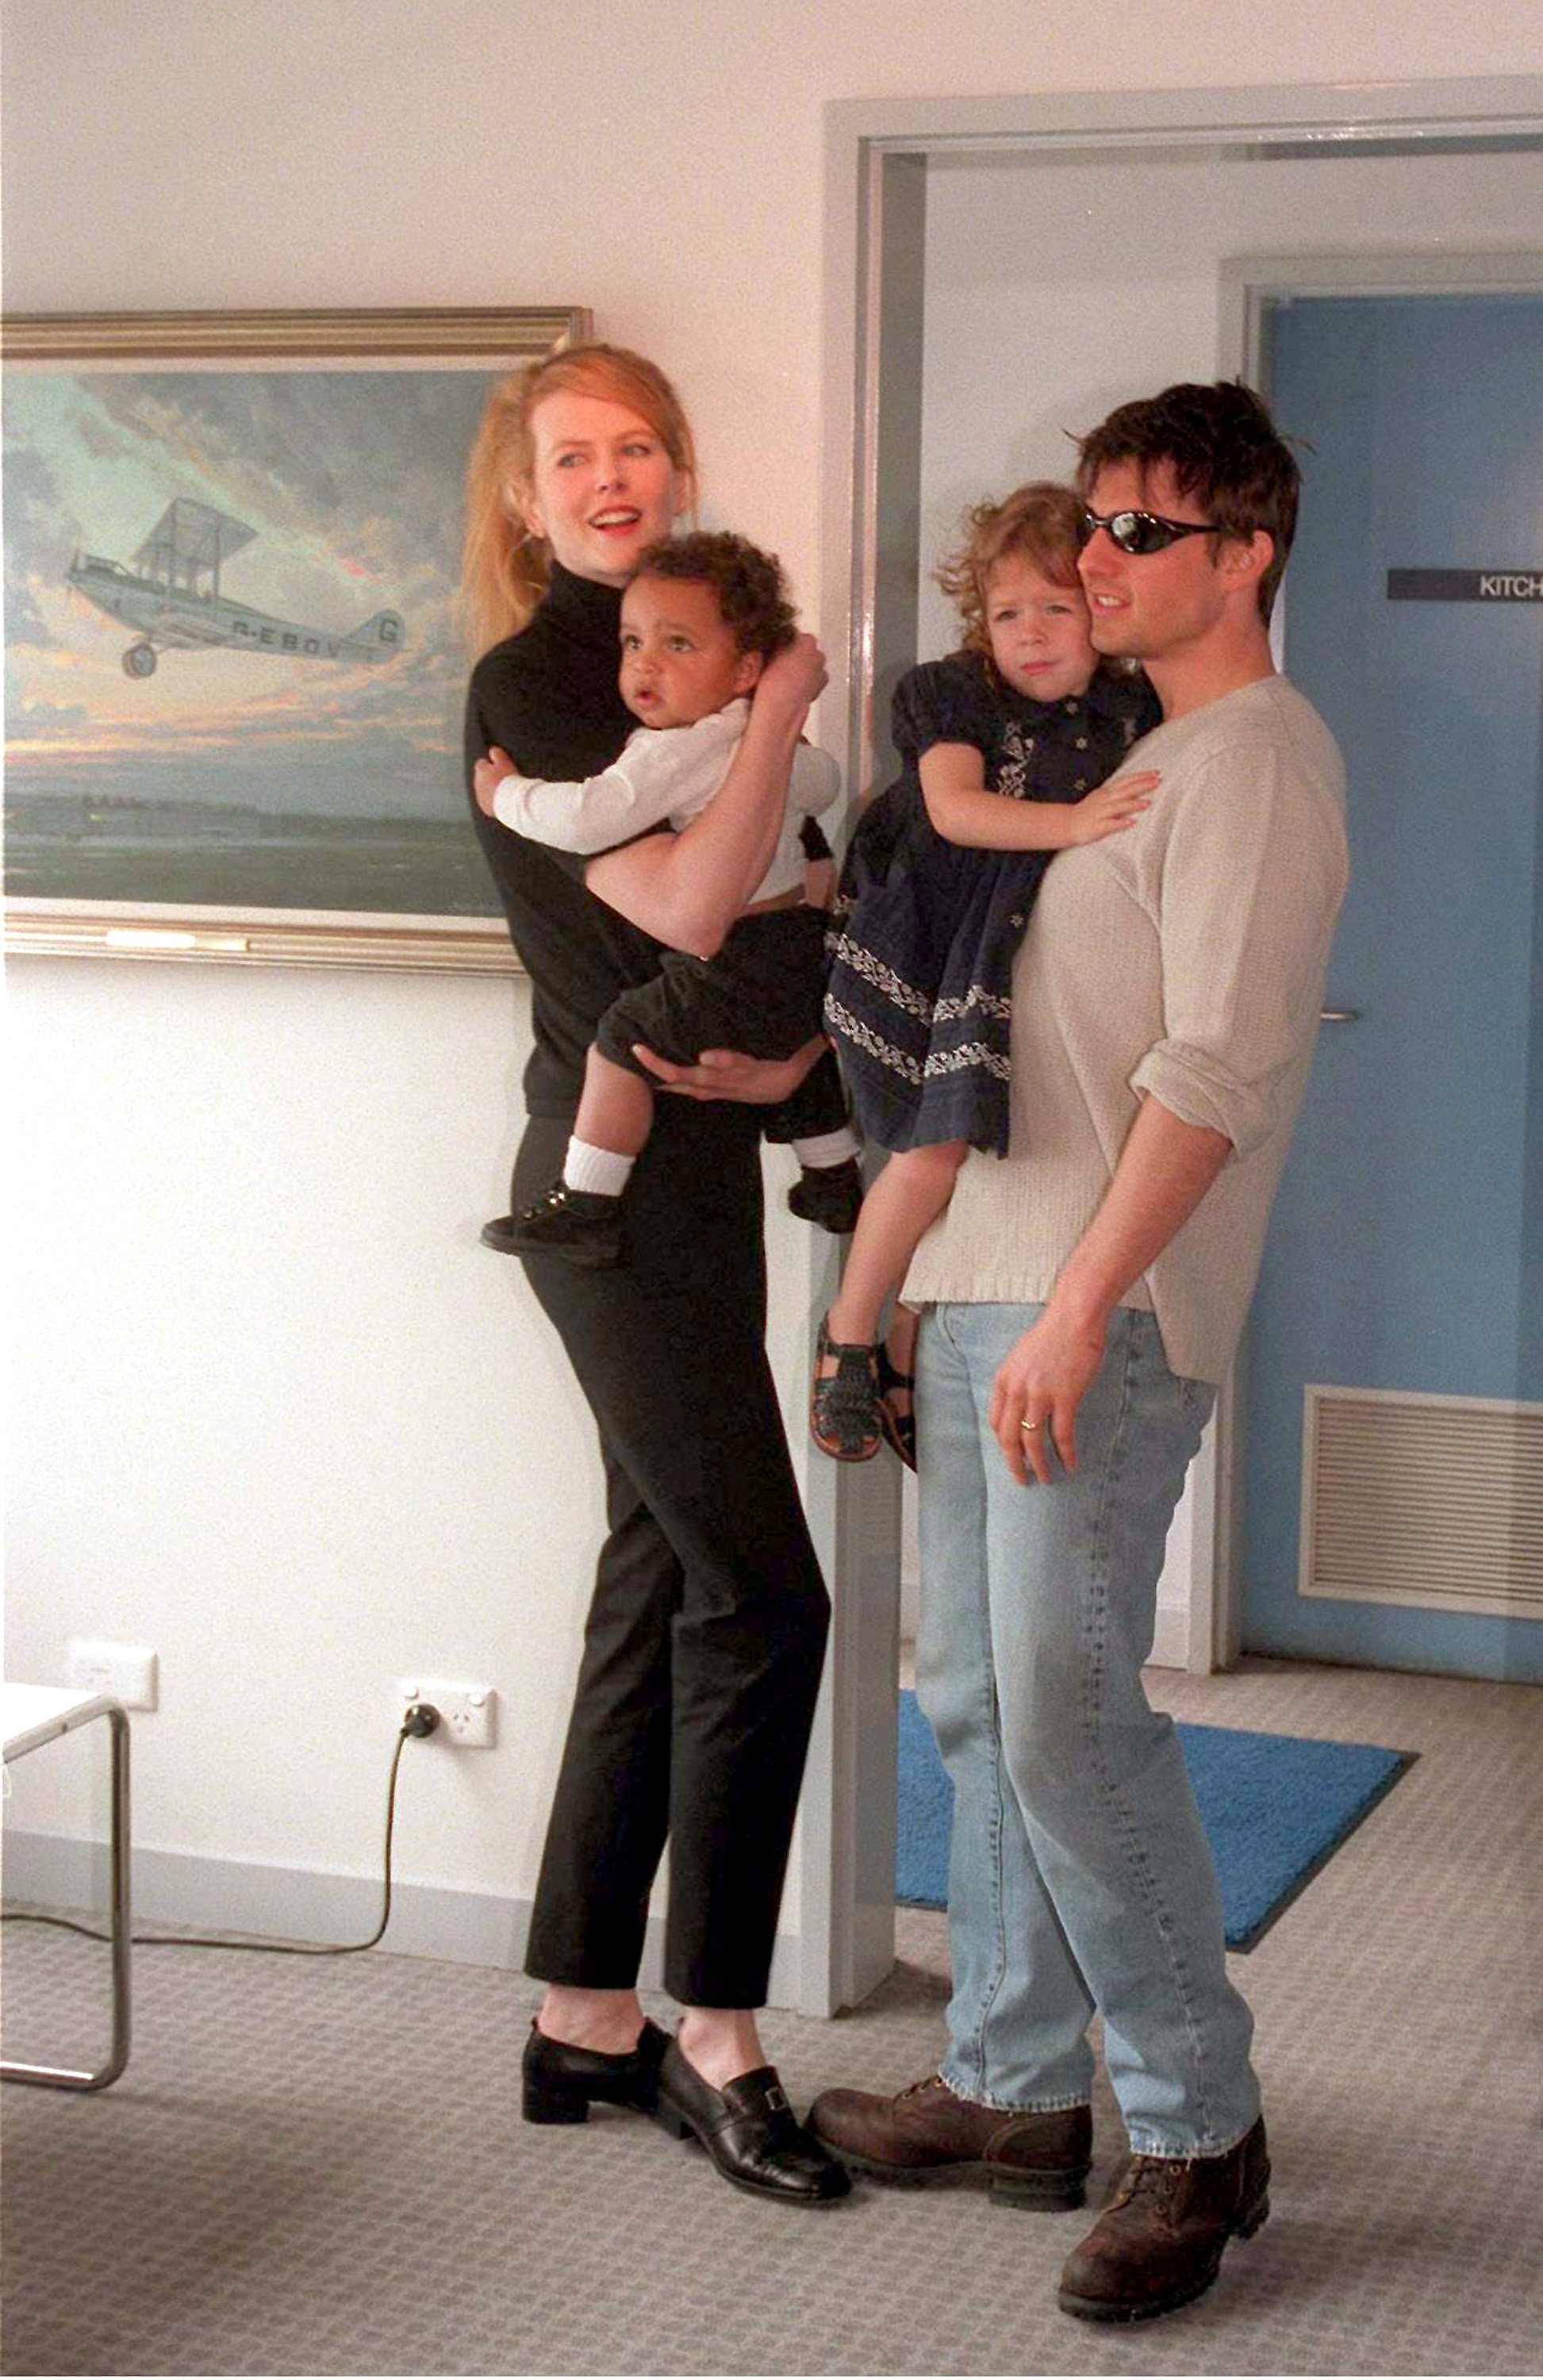 <p>Nicole Kidman and then-husband <a href="https://www.wonderwall.com/celebrity/profiles/overview/tom-cruise-408.article">Tom Cruise</a> carried son Conner (then 1) and daughter Bella (then 3) as they arrived at Sydney Kingsford Smith airport in Sydney, Australia, on Jan. 24, 1996. Keep reading to see them now...</p>